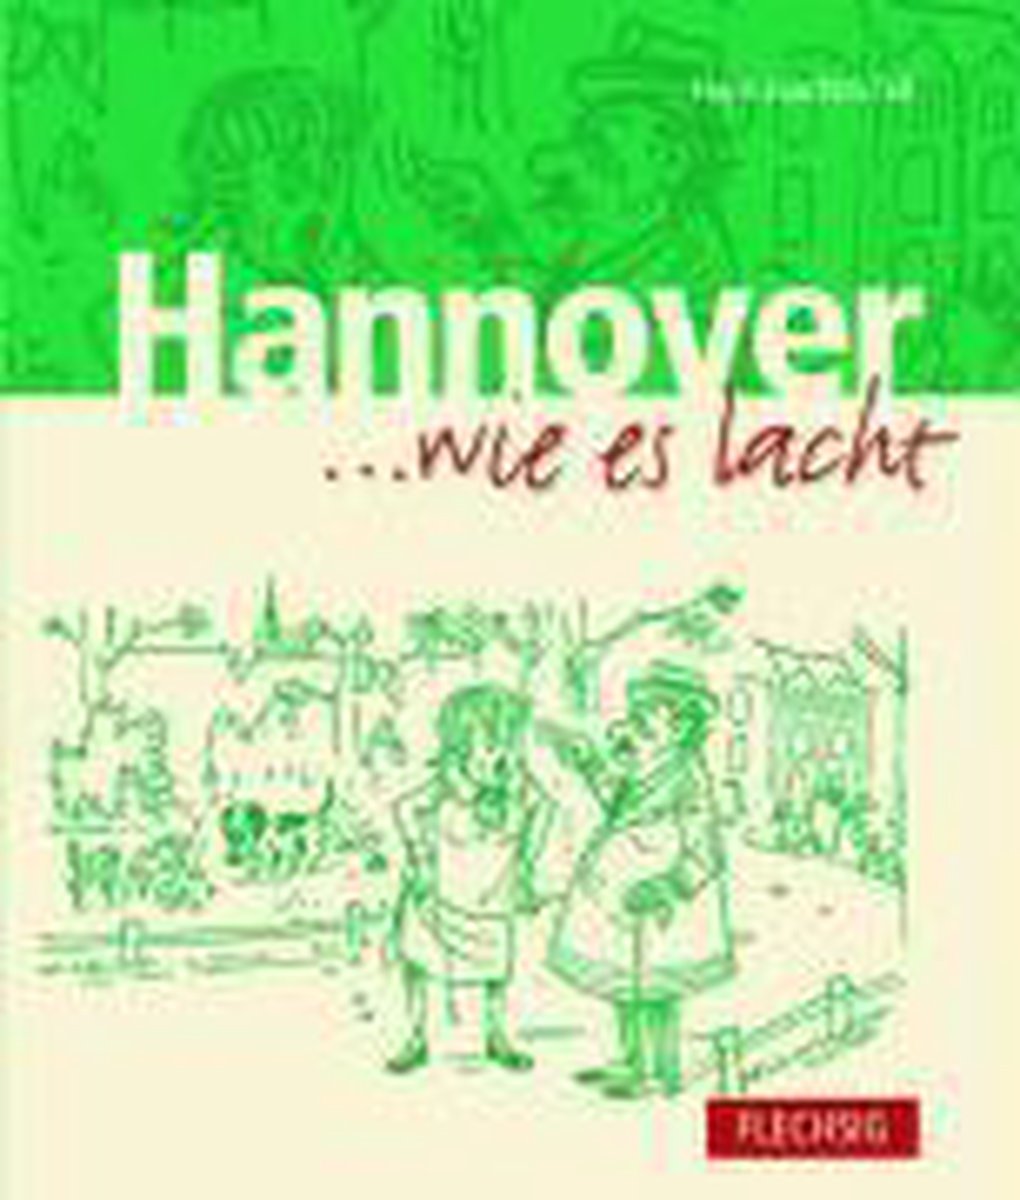 Hannover ... wie es lacht